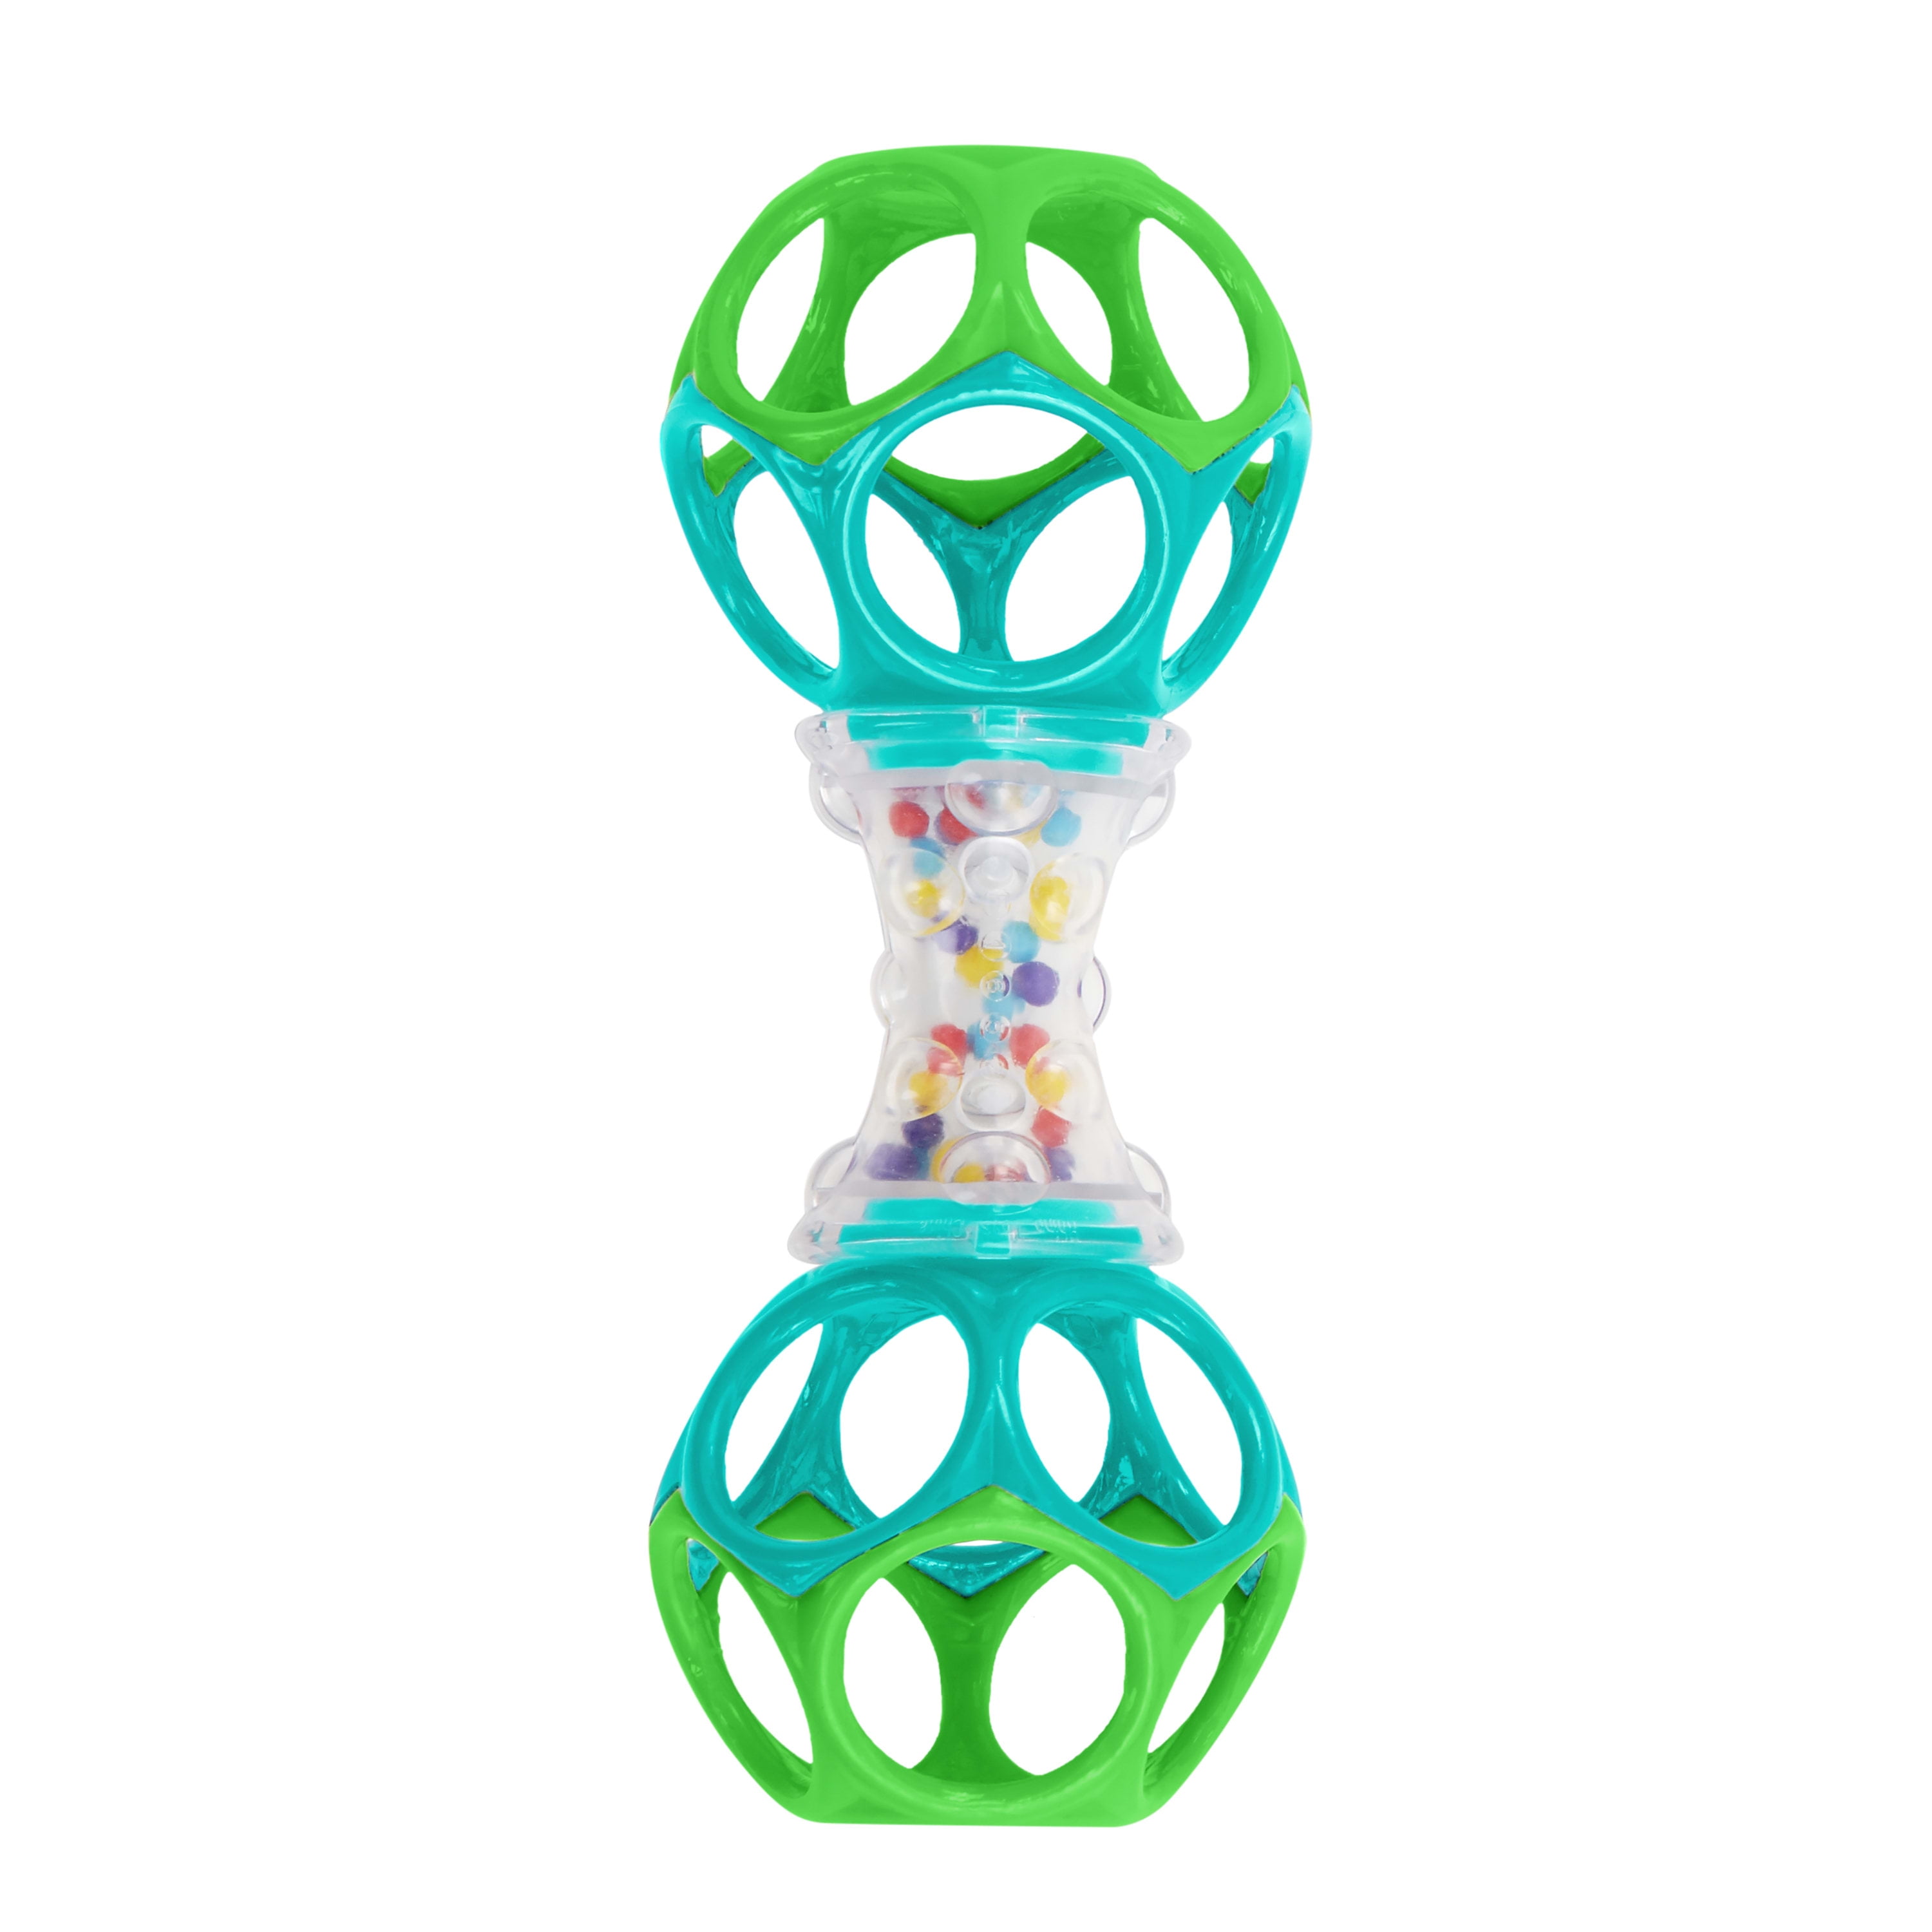 Oball Easy Grasp Shaker Rattle BPA-Free Infant Toy in Blue/Green, Unisex